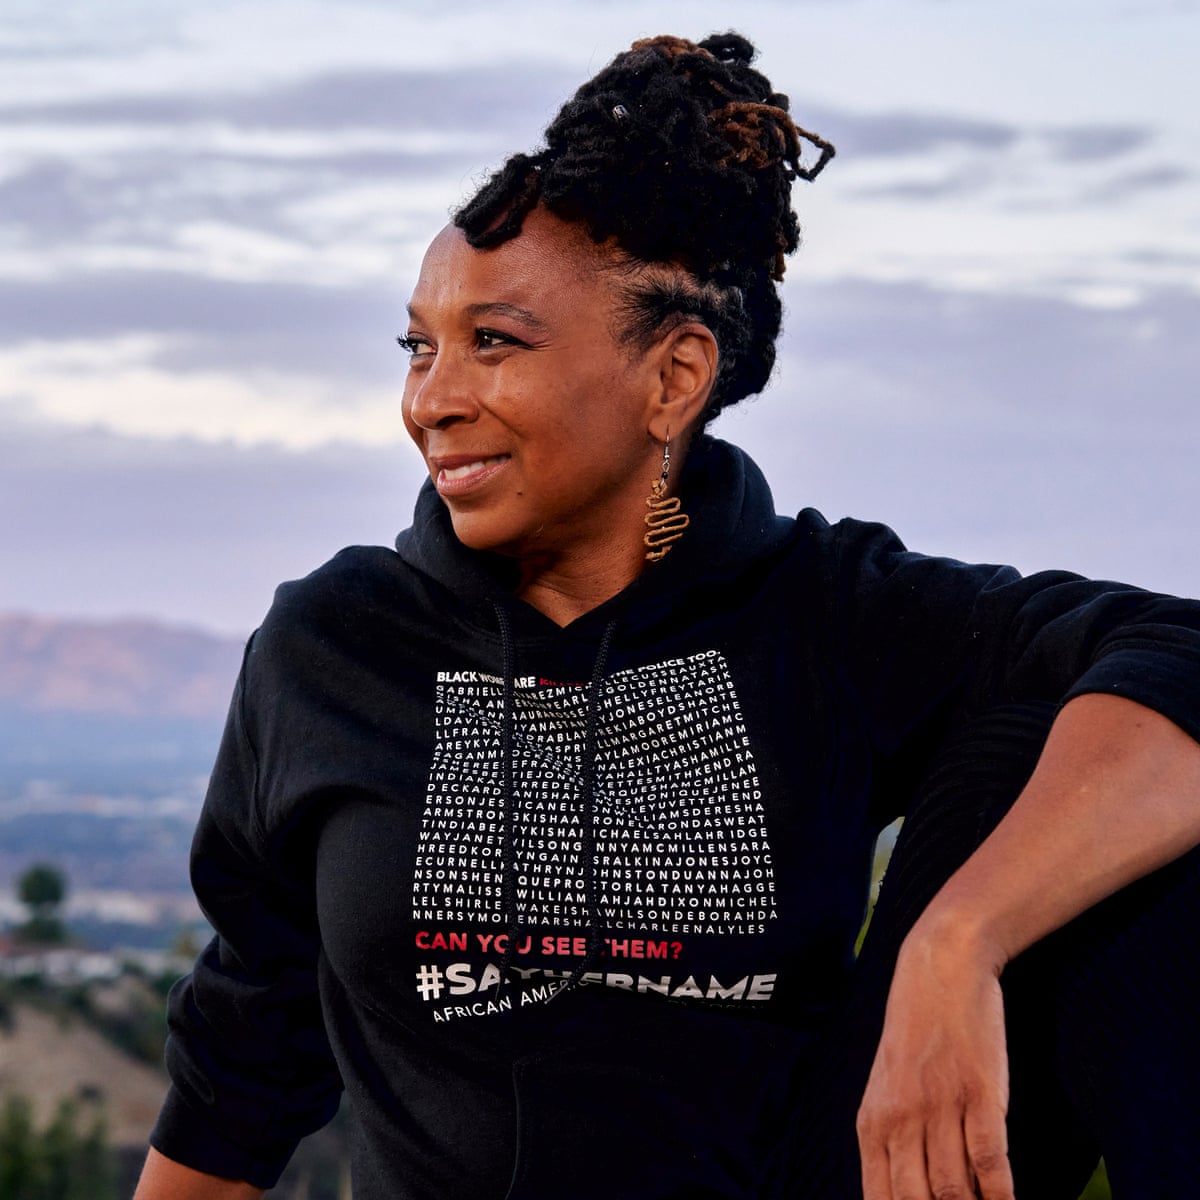 Scholar Kimberle Crenshaw wearing a black sweatshirt with the names of Black women memorialized by the #SayHerName movement